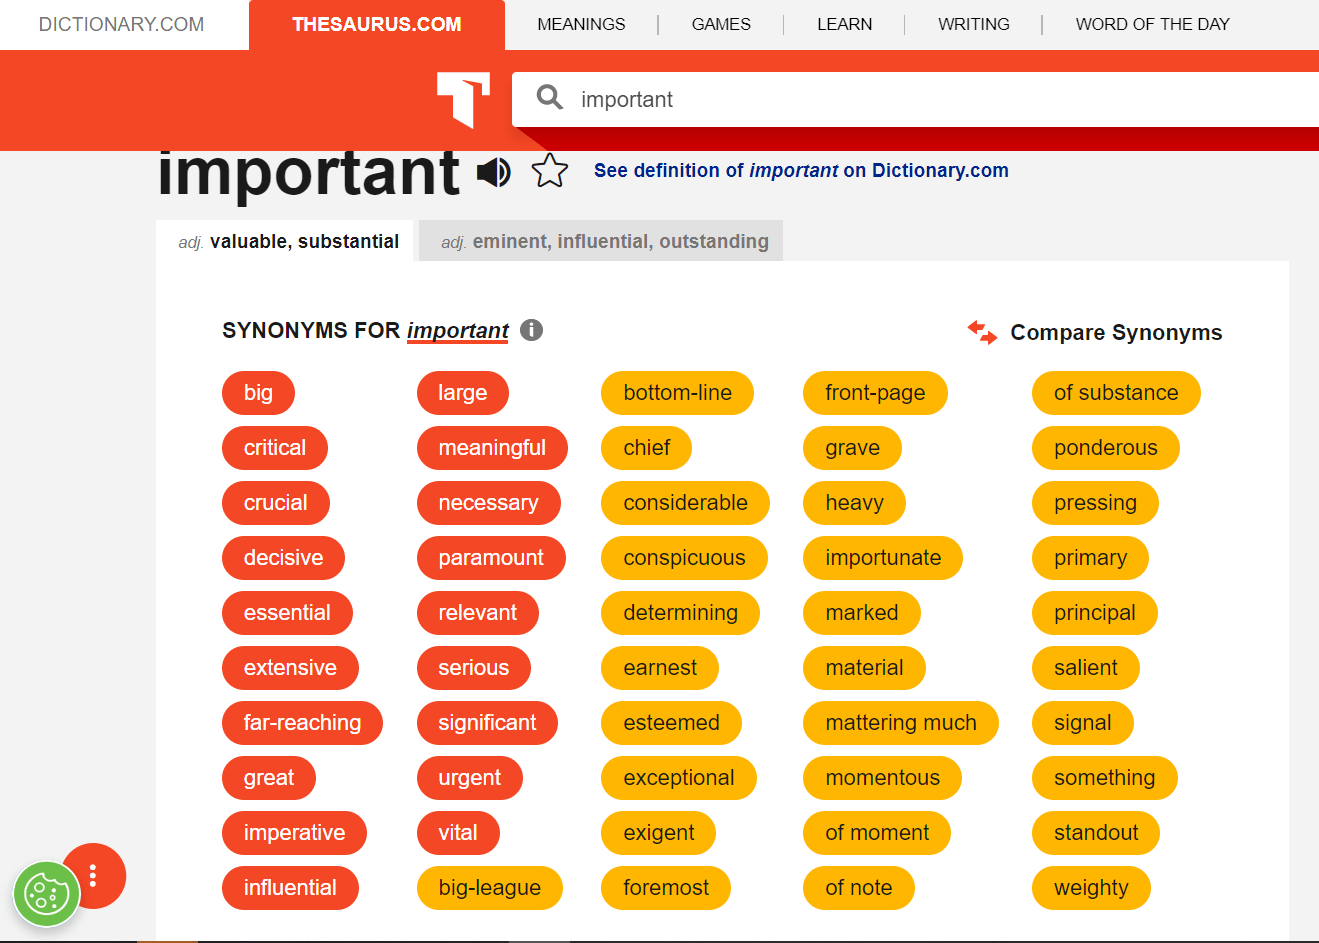 thesaurus synonyms for important